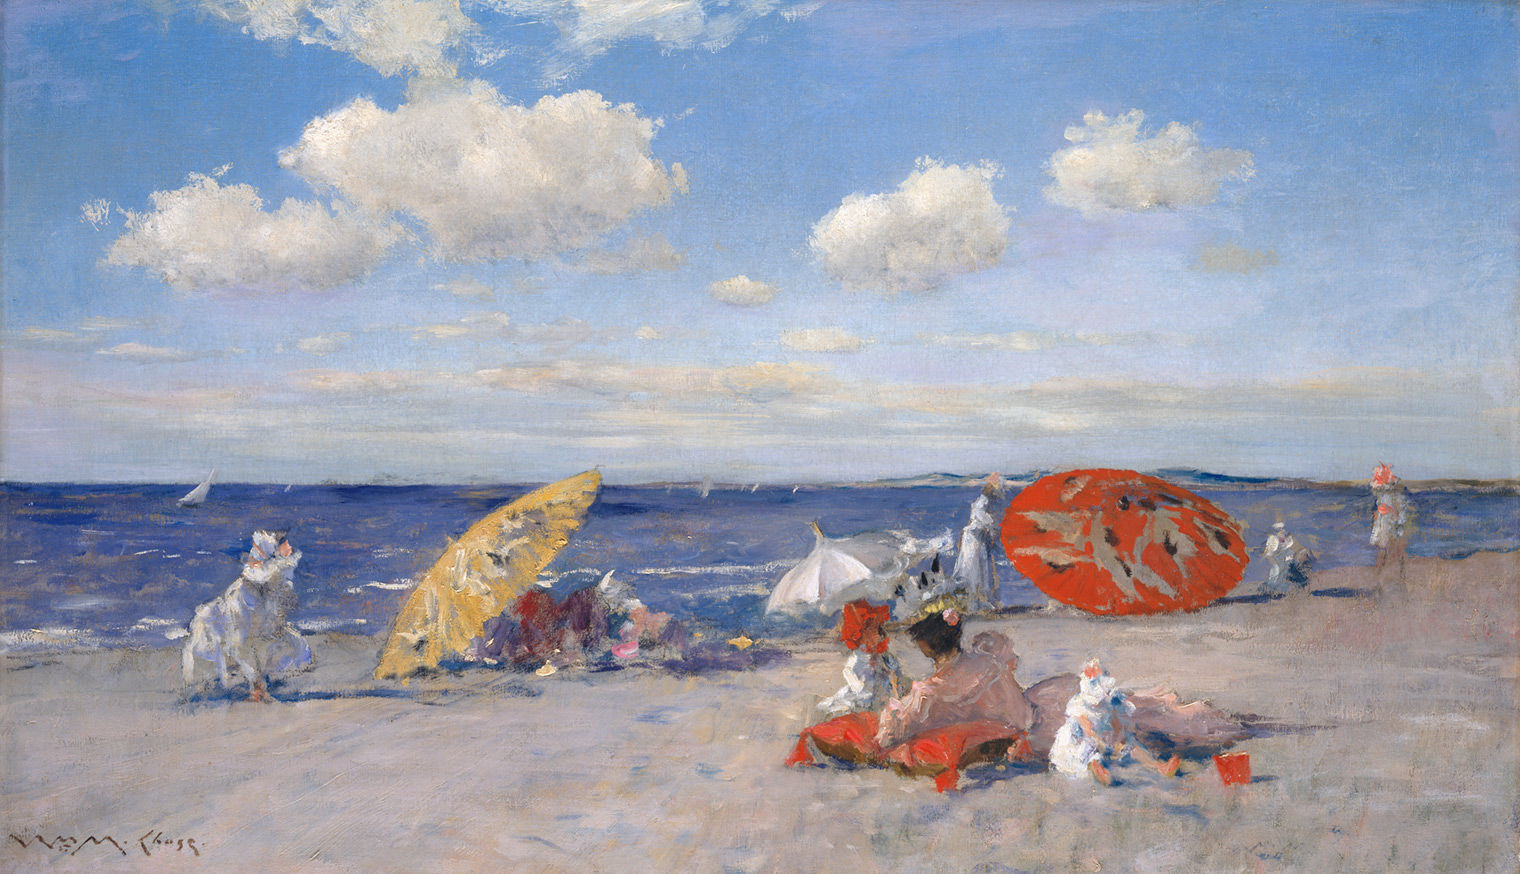 A painting of several groups of people at the beach, with parasols and umbrellas